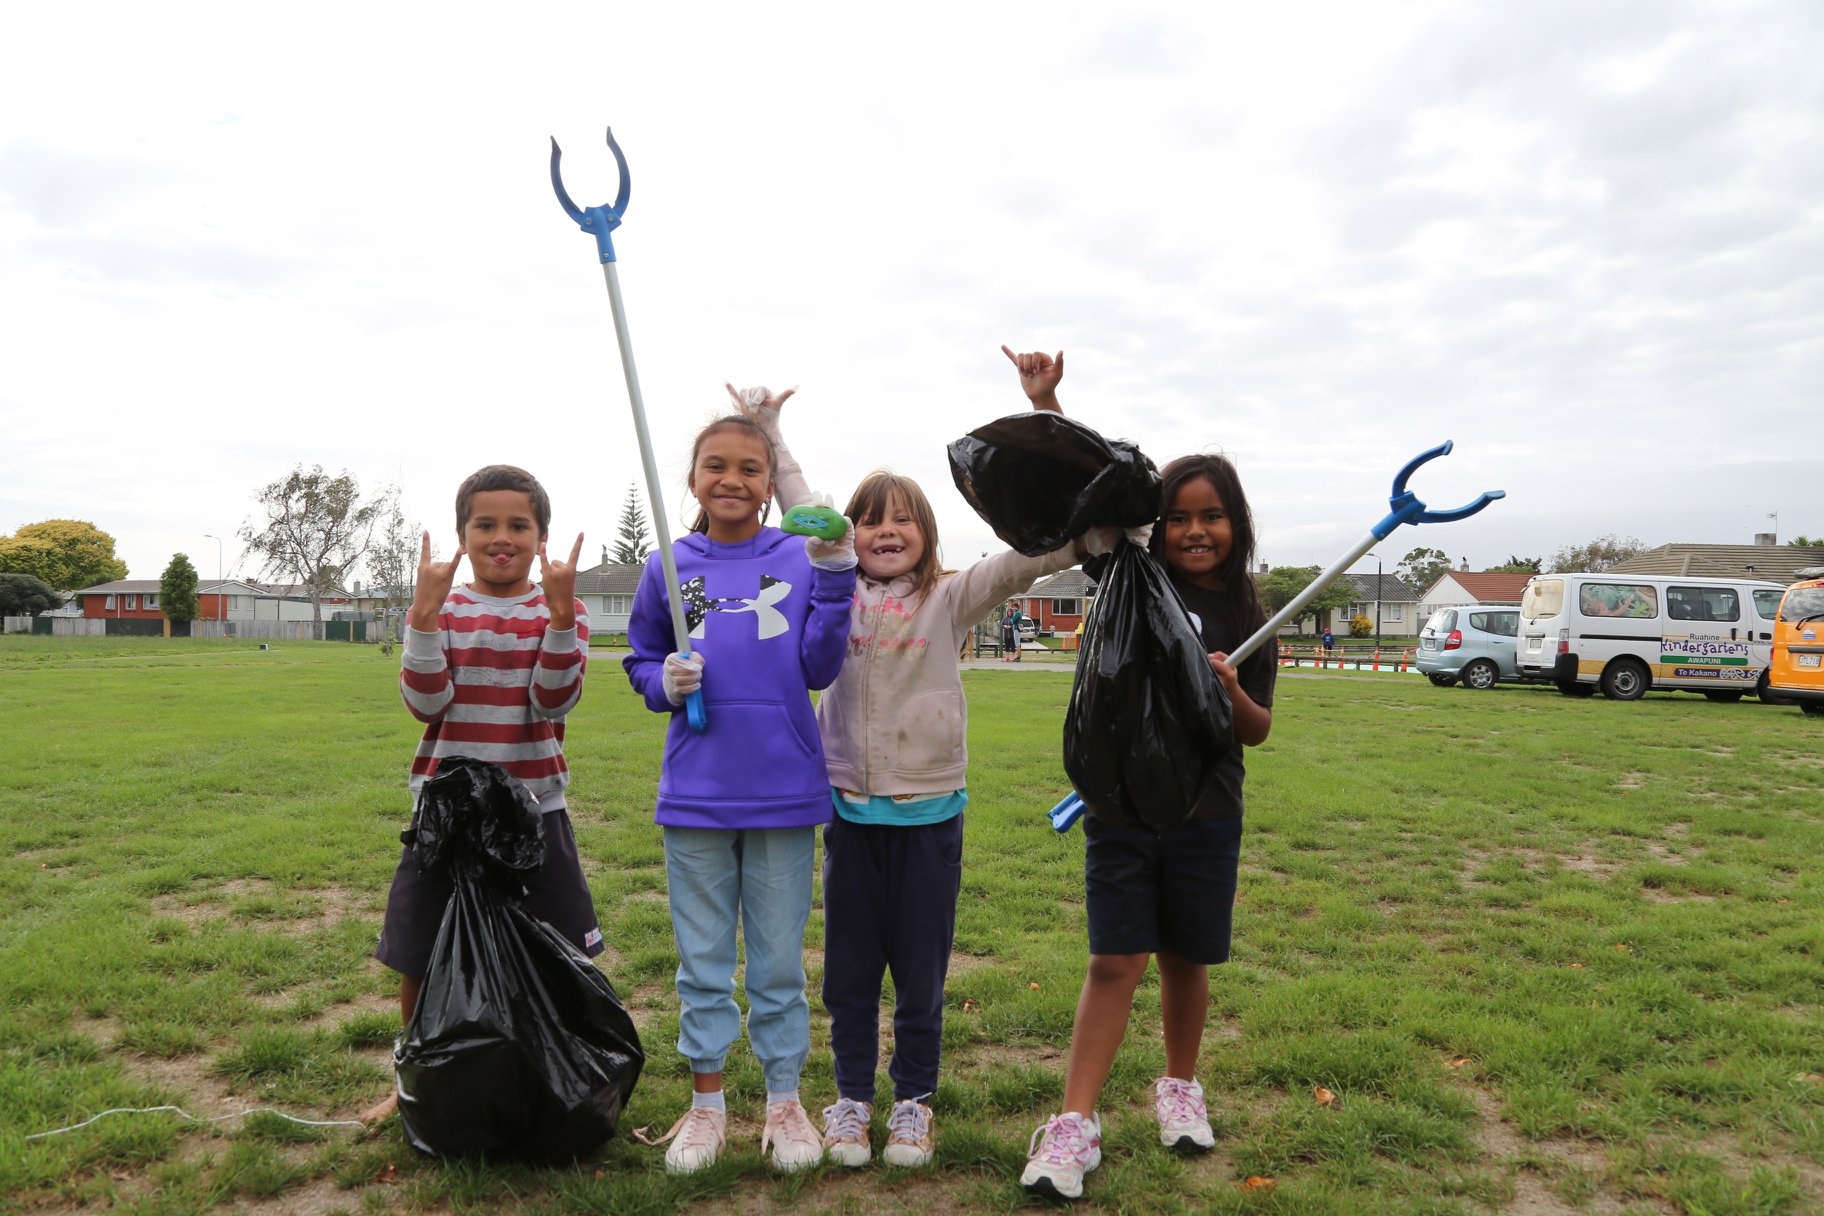 Photo shows kids with pick-up sticks and bags of rubbish at a community cleanup event in a park.